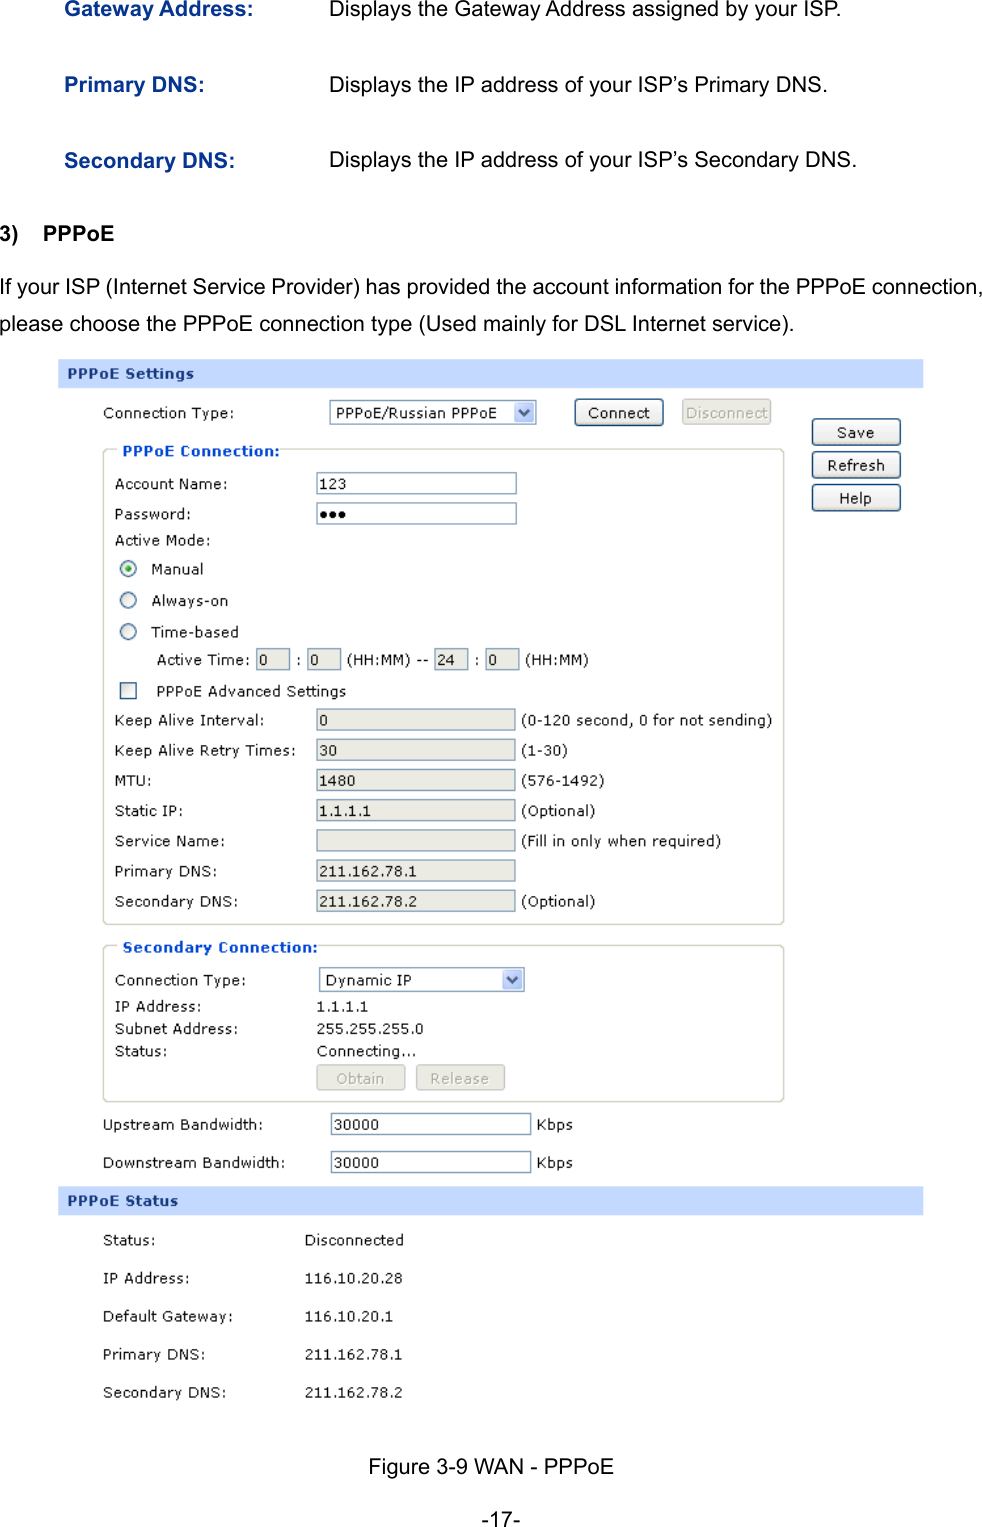  -17- Gateway Address:  Displays the Gateway Address assigned by your ISP. Primary DNS:  Displays the IP address of your ISP’s Primary DNS. Secondary DNS:  Displays the IP address of your ISP’s Secondary DNS. 3) PPPoE  If your ISP (Internet Service Provider) has provided the account information for the PPPoE connection, please choose the PPPoE connection type (Used mainly for DSL Internet service).  Figure 3-9 WAN - PPPoE 